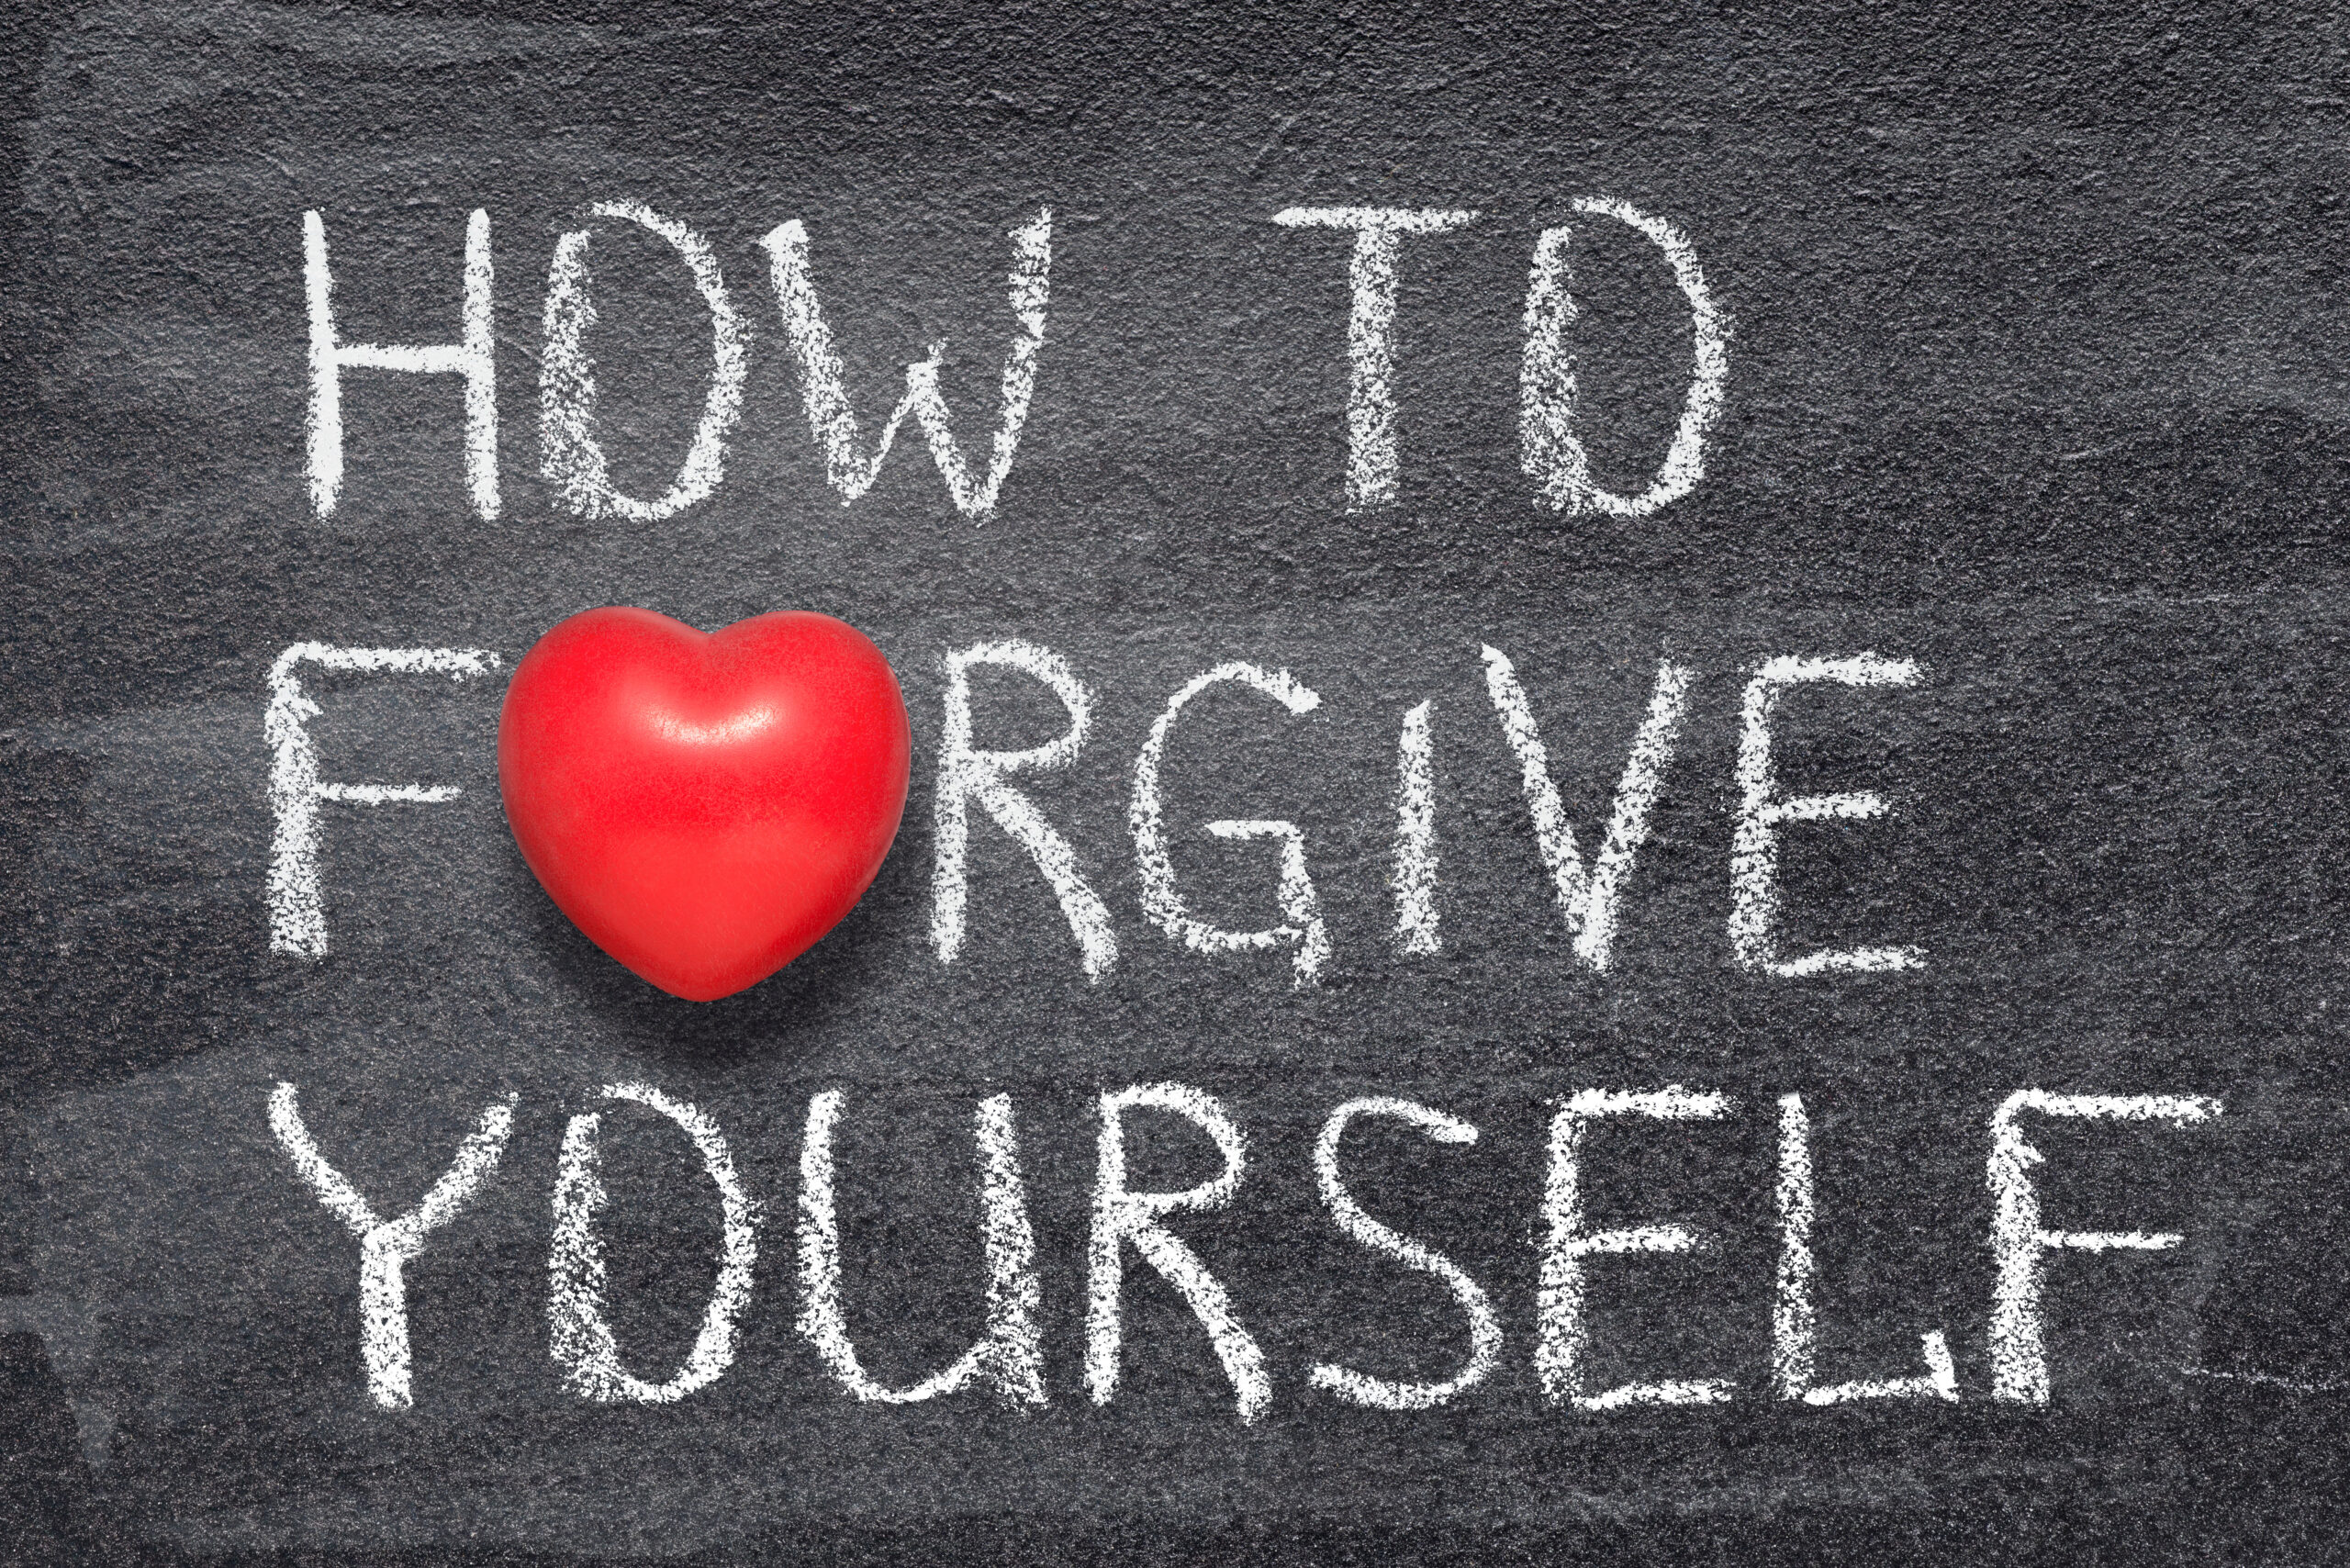 The words "how to forgive yourself" are written on a chalkboard, with a heart as the "o" in forgive yourself.